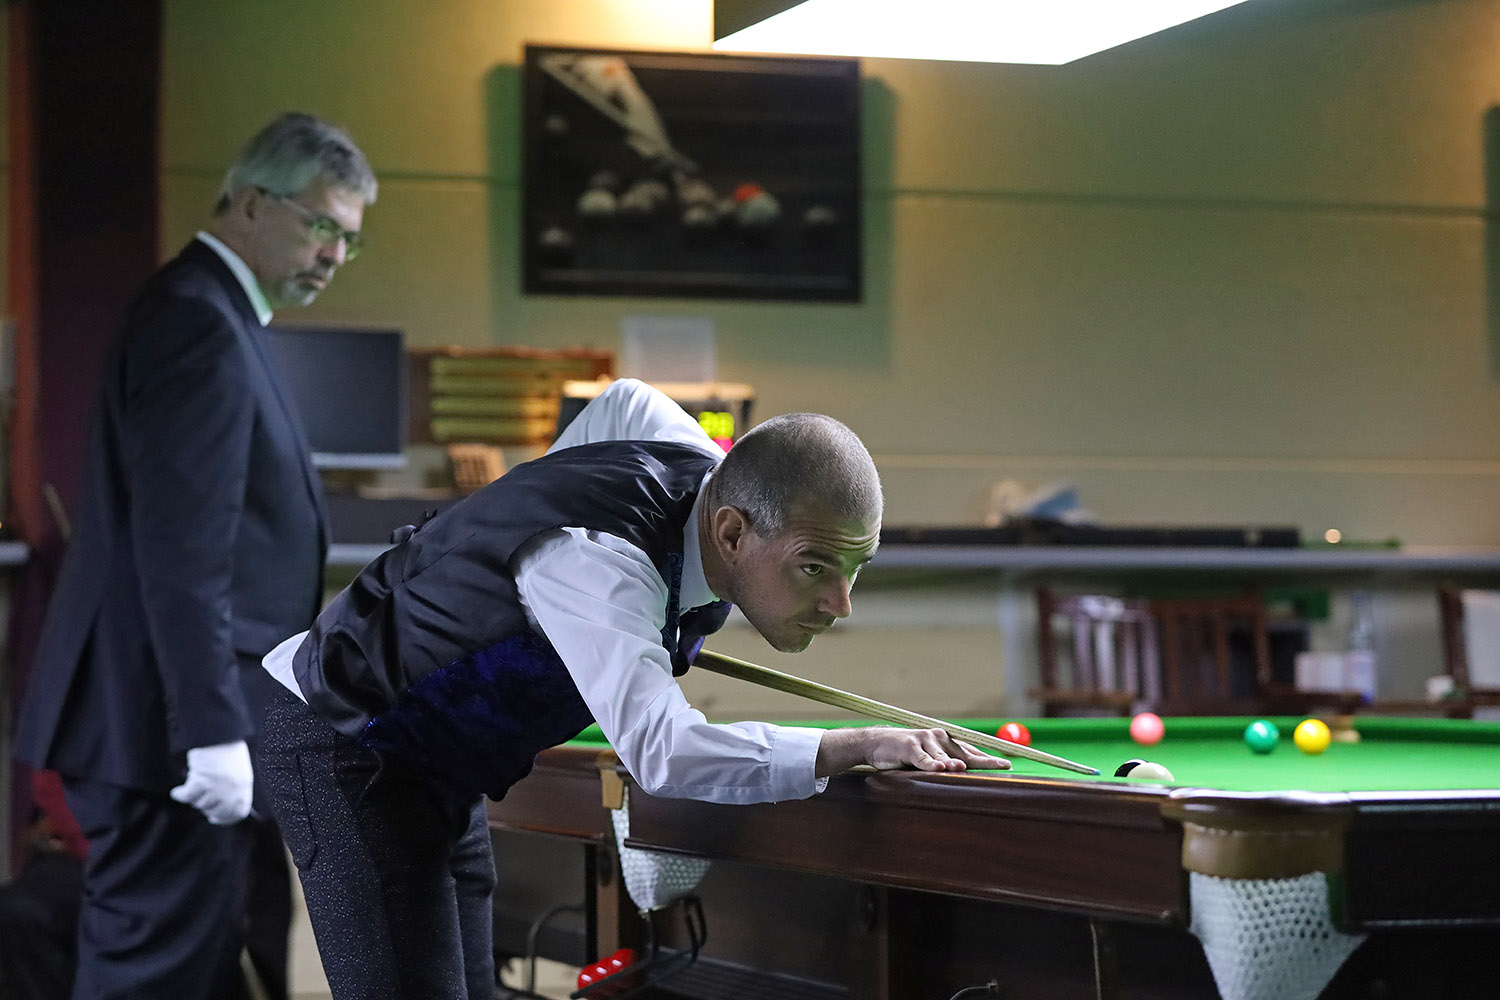 Kit Kennedy plays snooker shot with referee watching